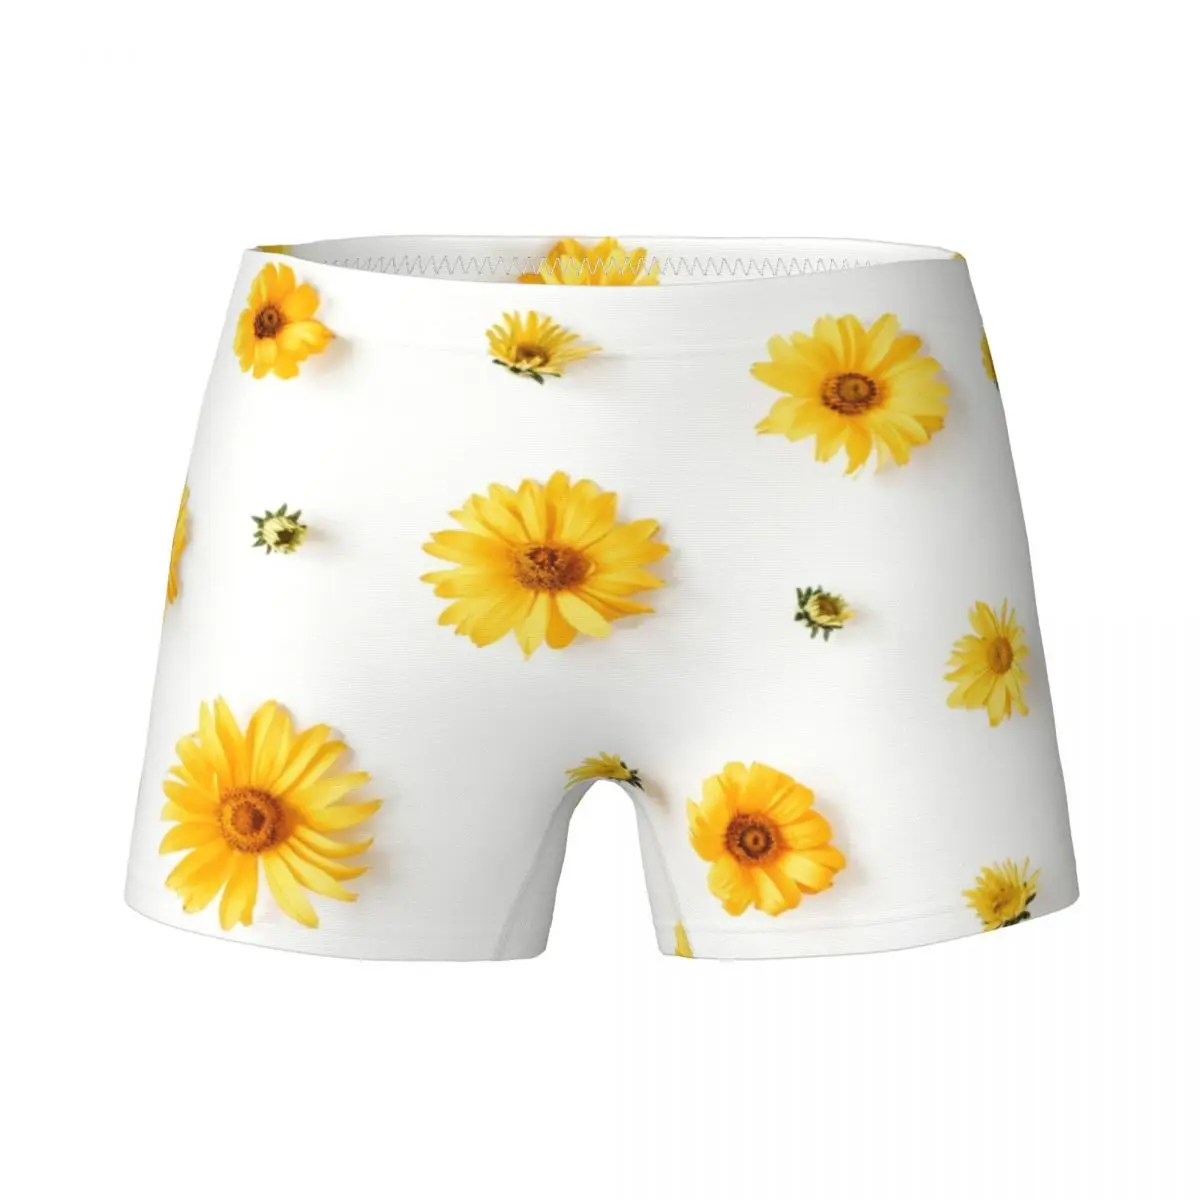 

Young Girls Pretty Yellow Daisy Boxers Child Cotton Cute Underwear Kids Teenagers Underpants Soft Briefs Size 4T-15T